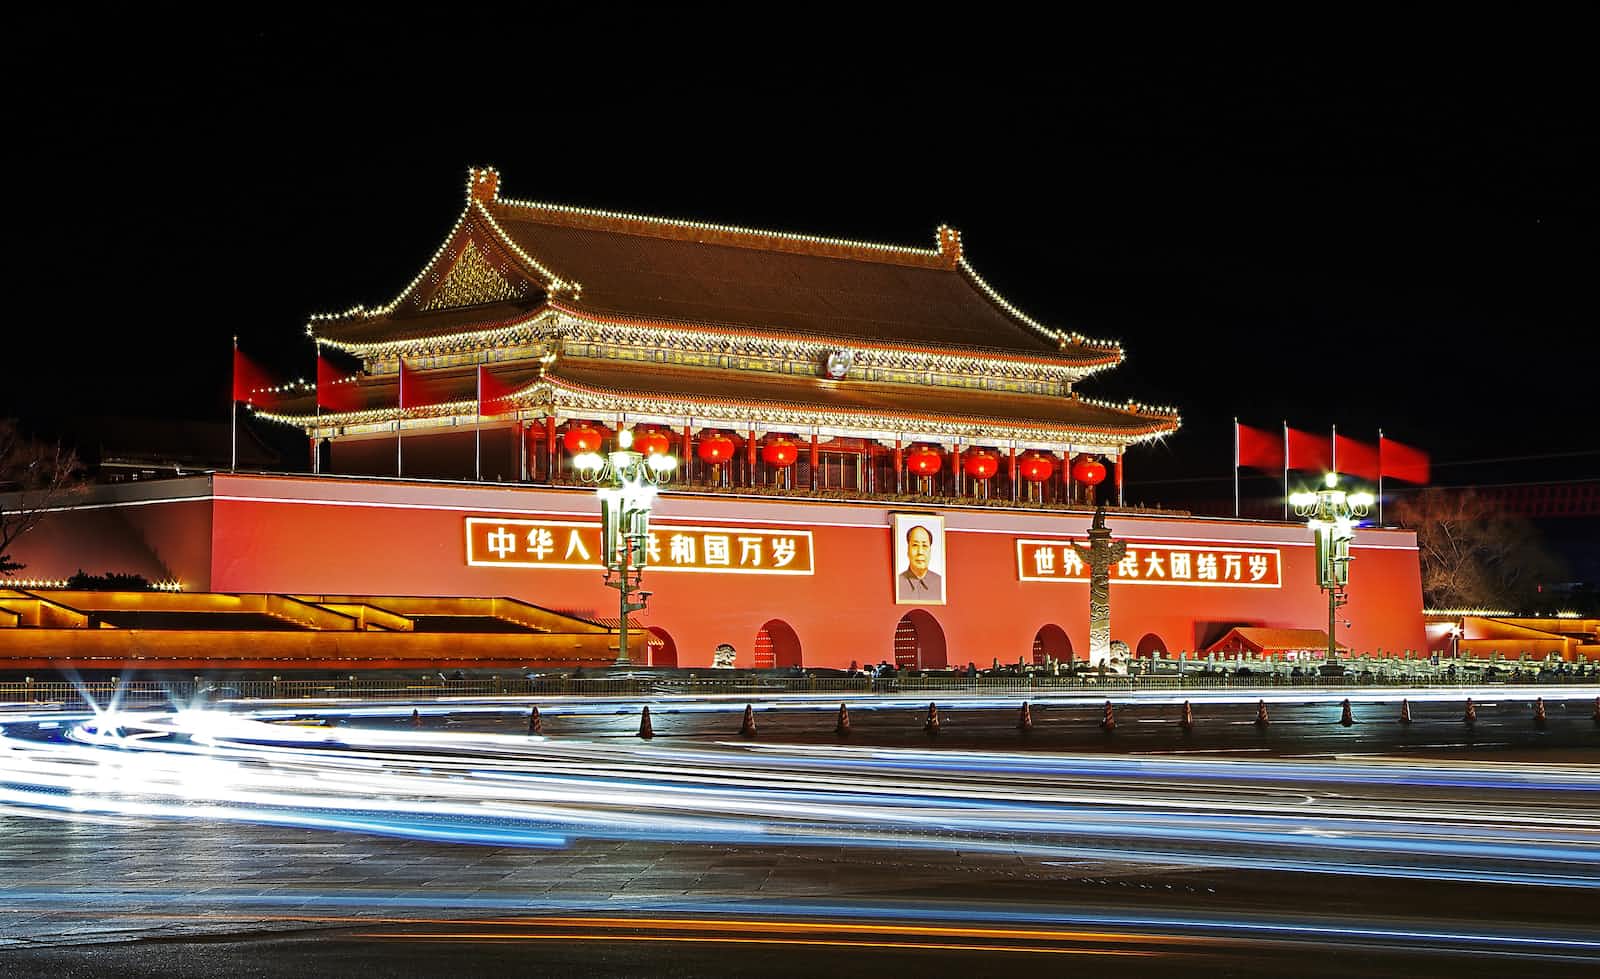 Forbidden City in China at night lit up